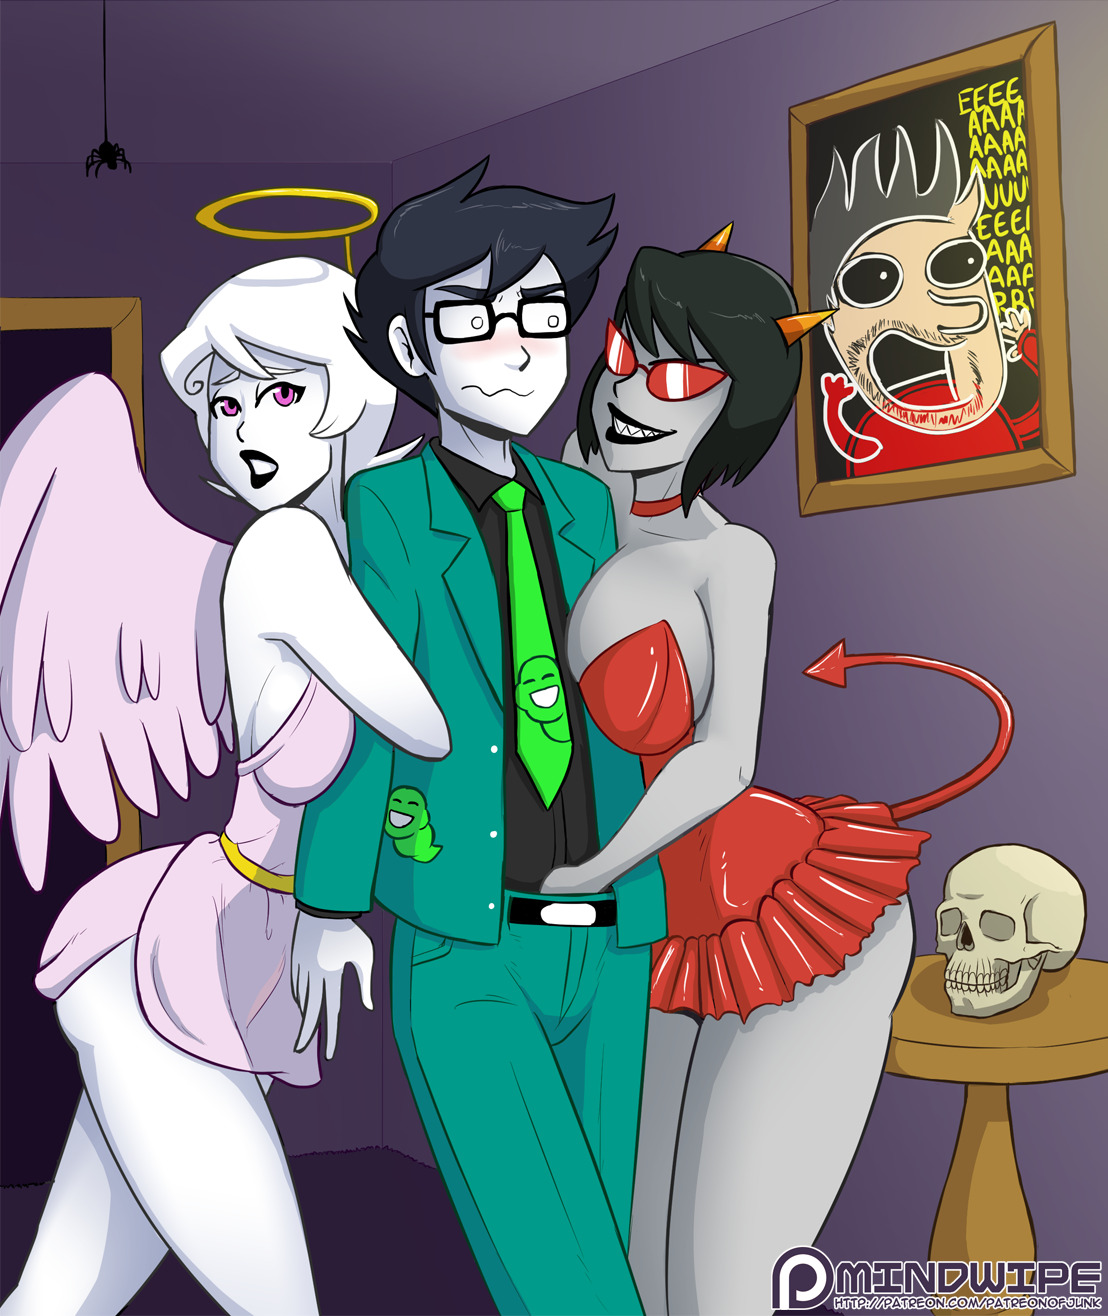 planetofjunk: Here’s the OTHER 2nd-place winner of the October Patreon Poll, (Homestuck)